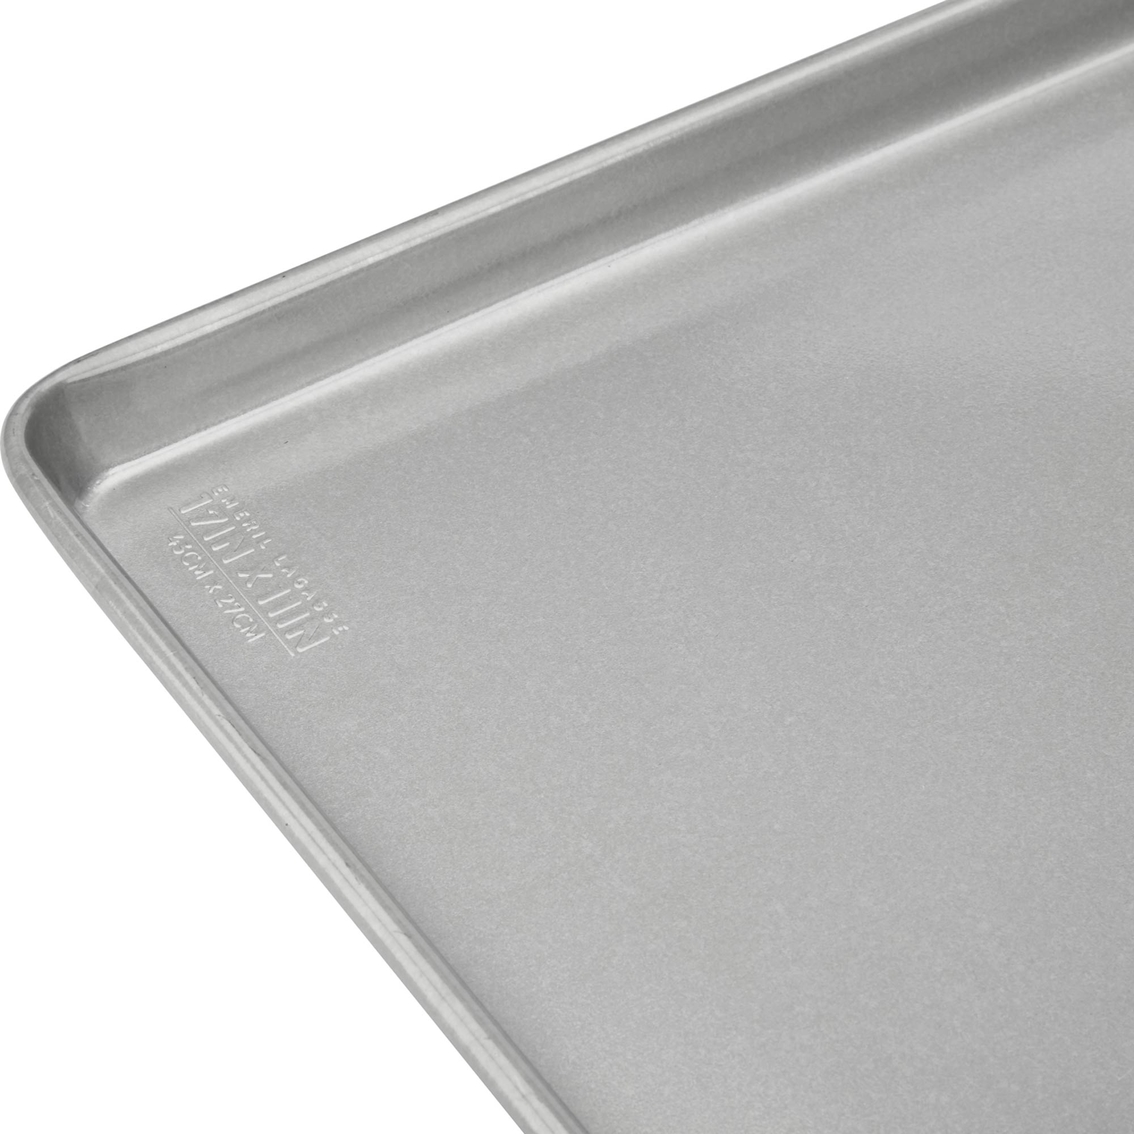 Emeril Nonstick Large Cookie Sheet, Baking Dishes, Household